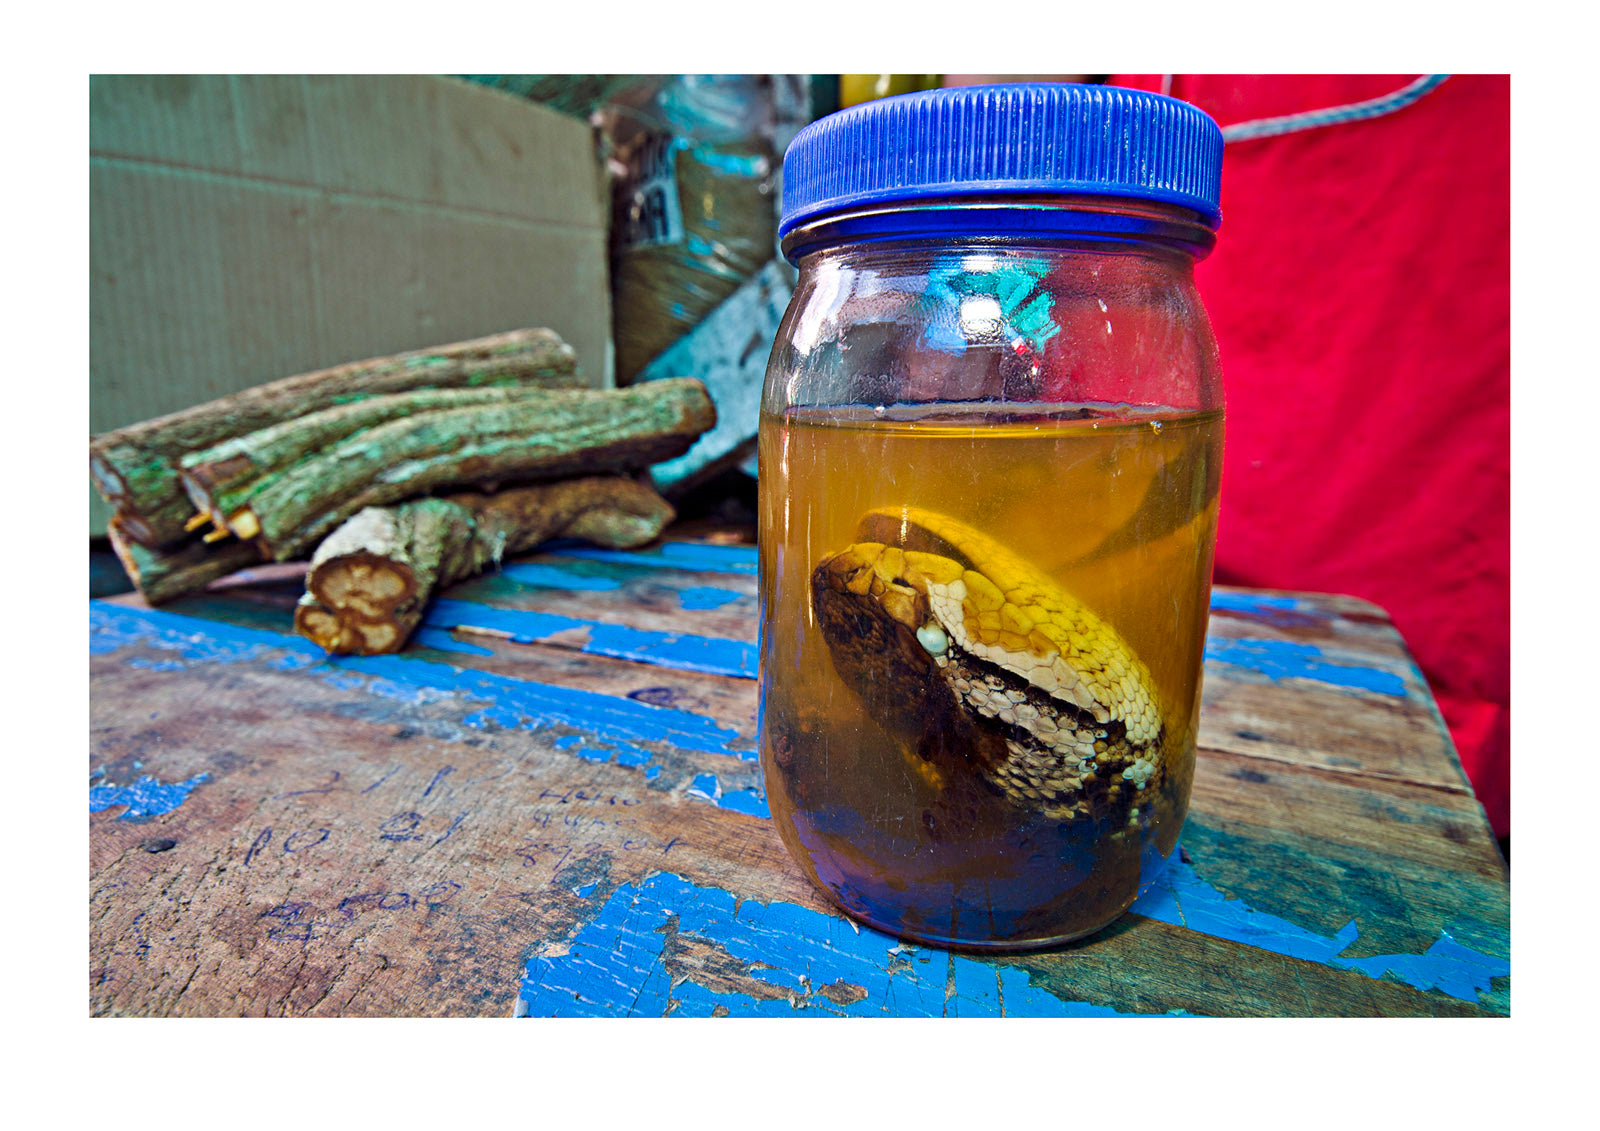 A South American Bushmaster head in alcohol for sale as traditional medicine in a black market. Belen Market, Iquitos, Amazon Basin, Loreto Region, Maynas Province, Peru.